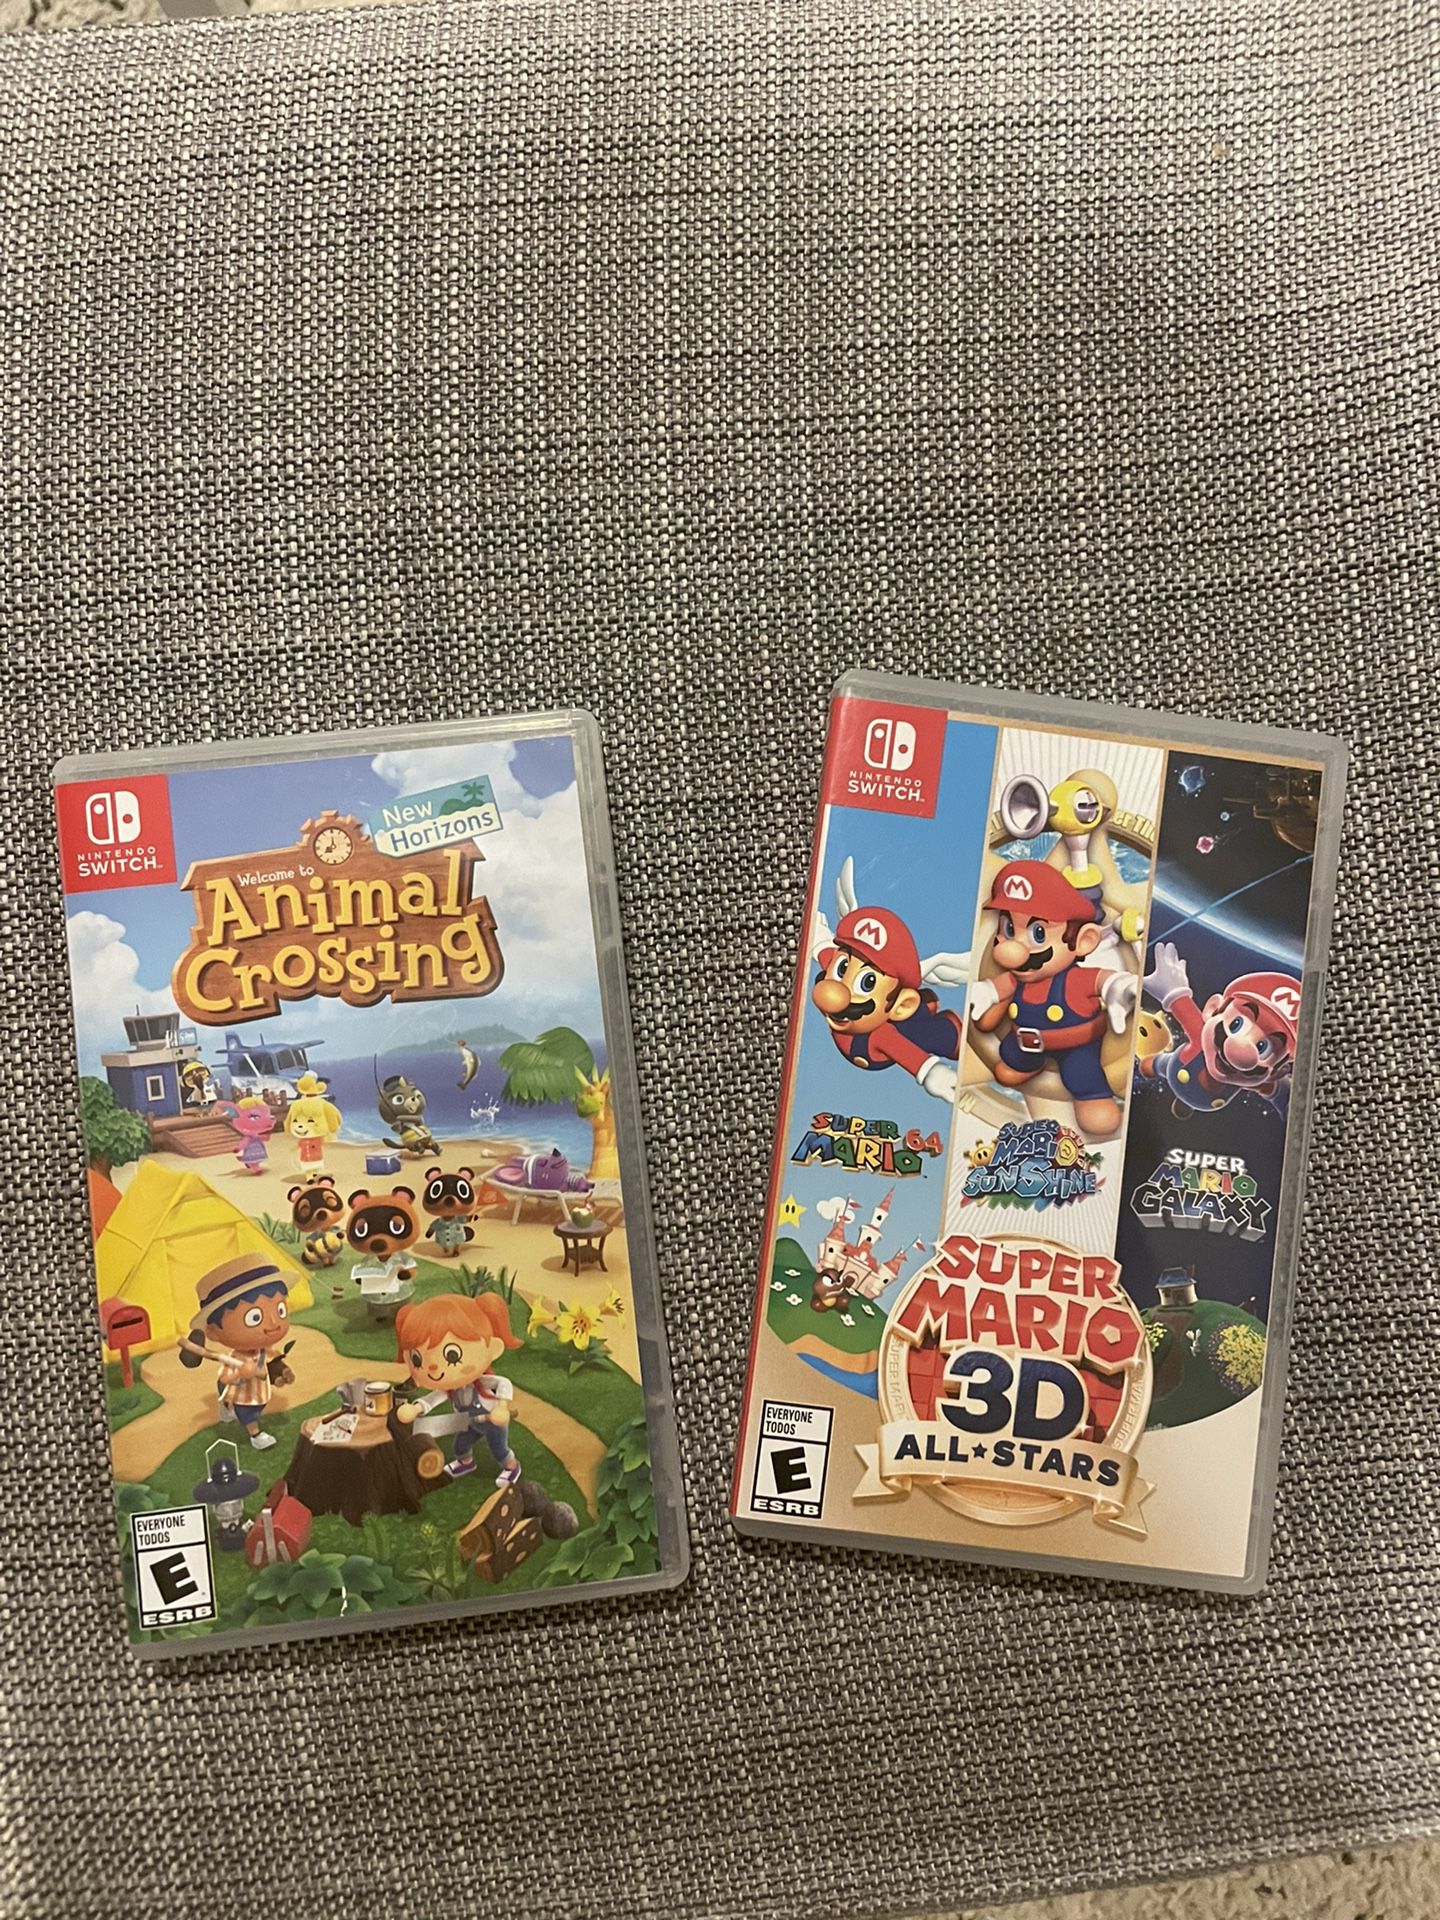 nintendo switch games animal crossing and super mario 3d